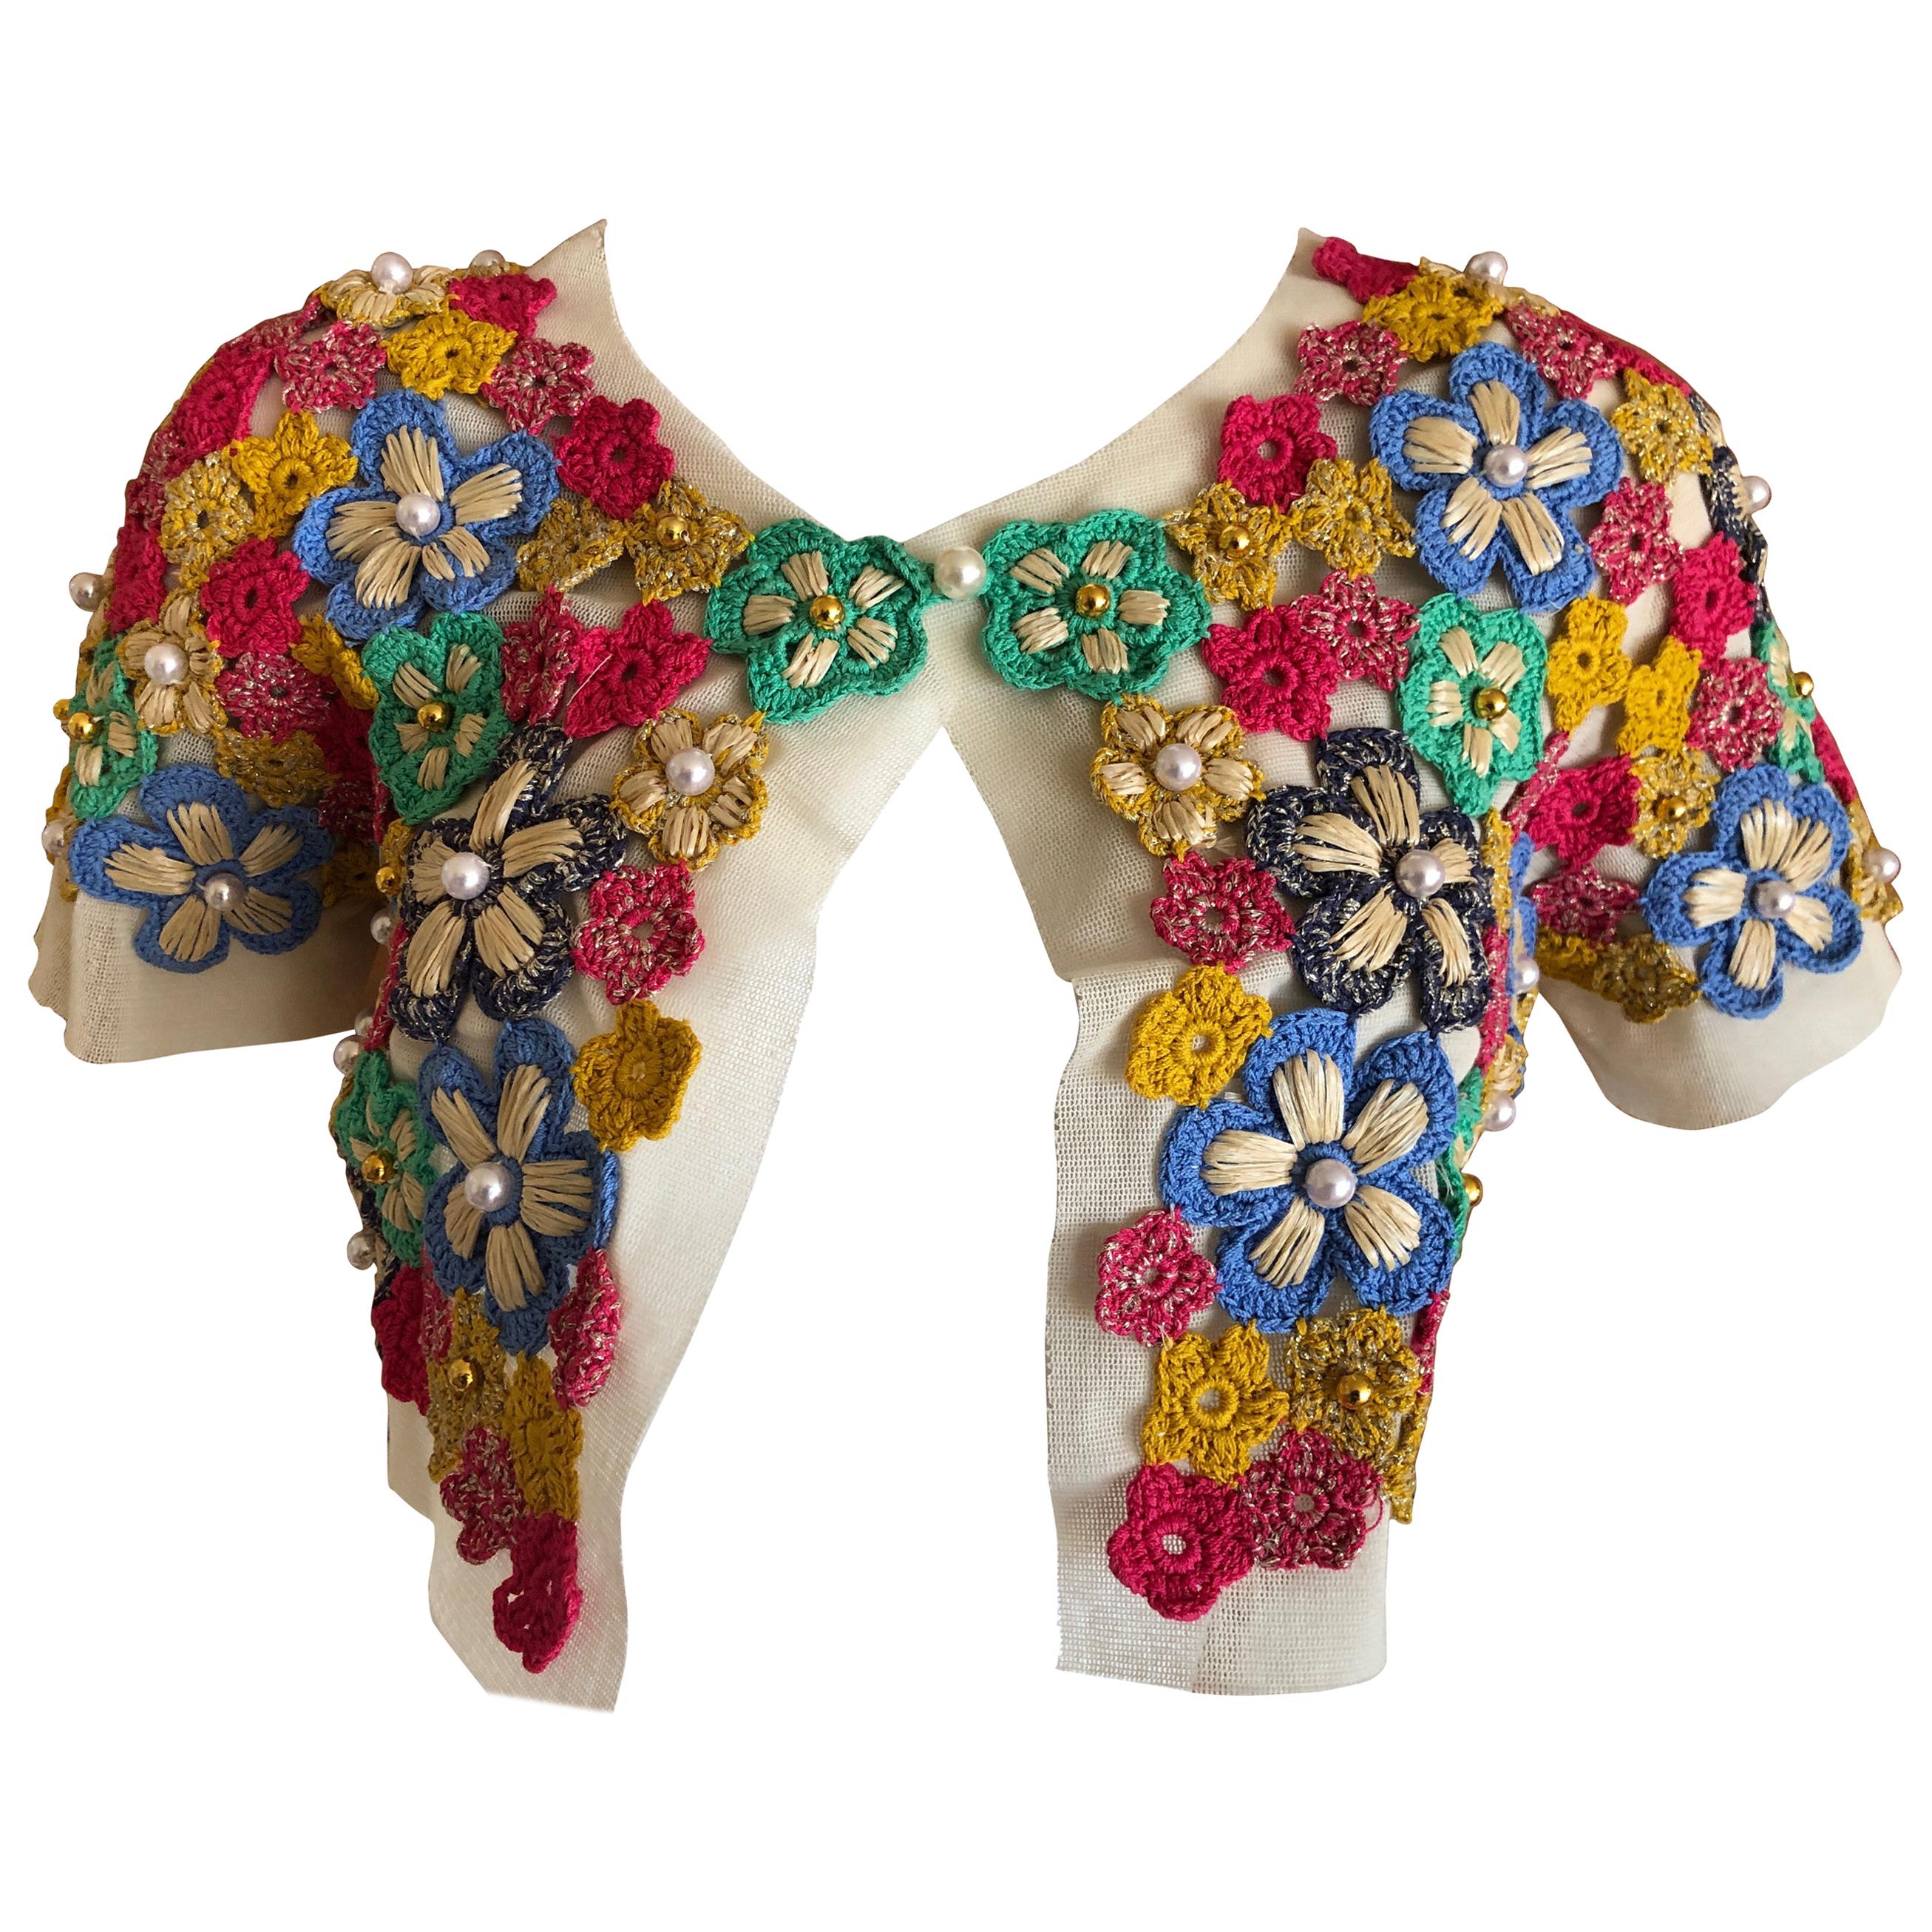 Moschino Hippy Chick Crochet Embellished Shrug for Cheap & Chic For Sale